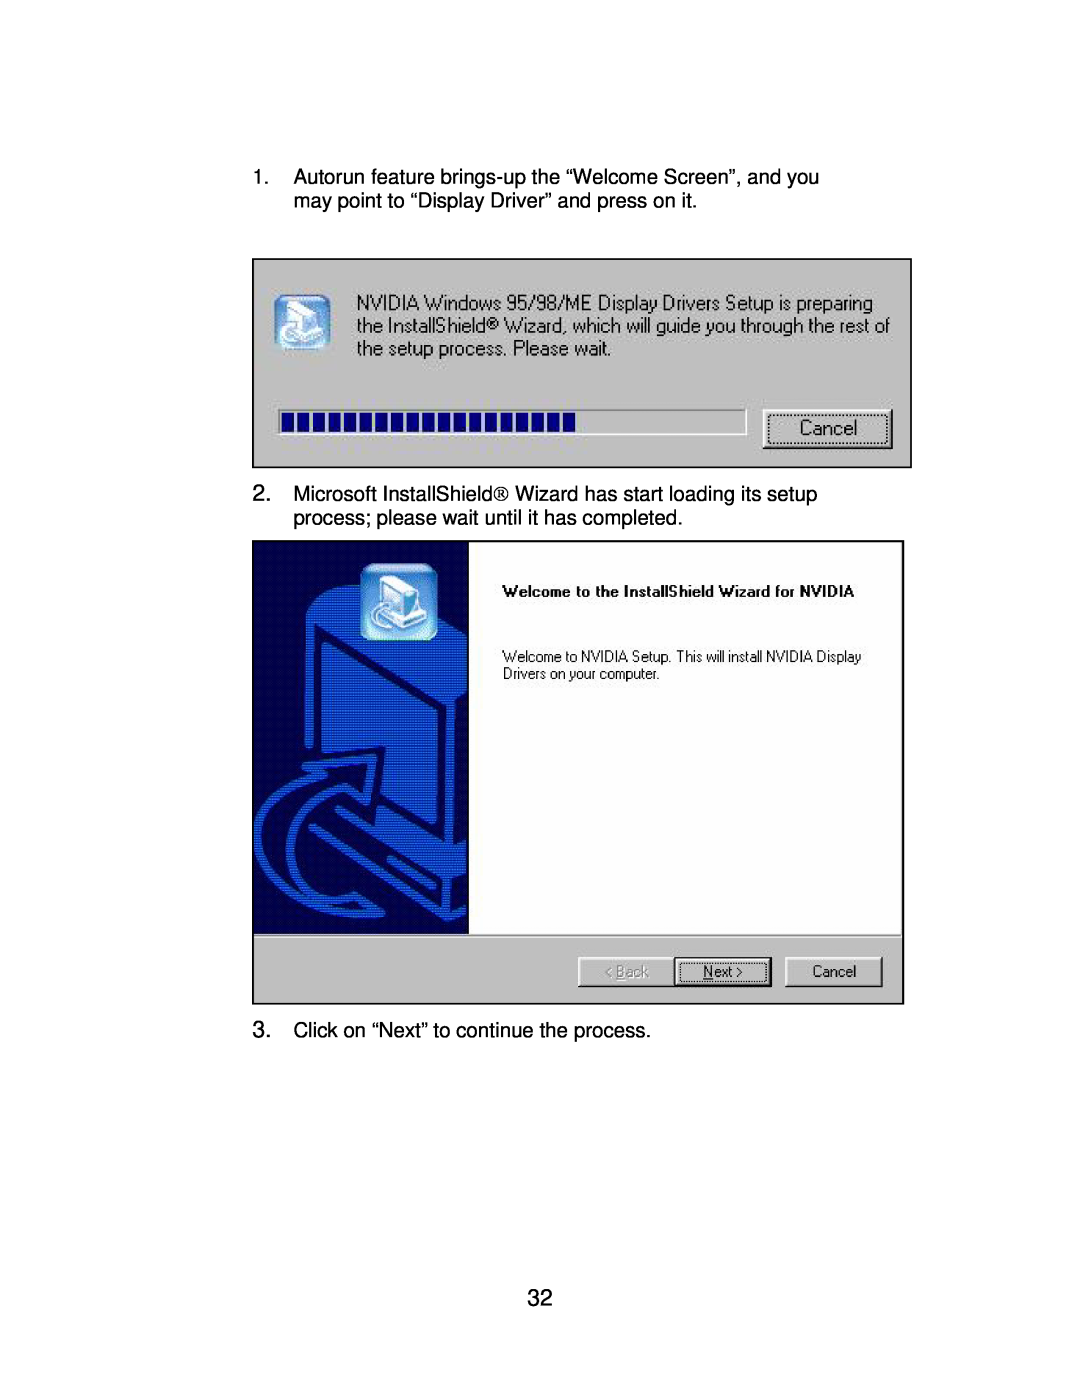 Jaton 5200 user manual Click on “Next” to continue the process 